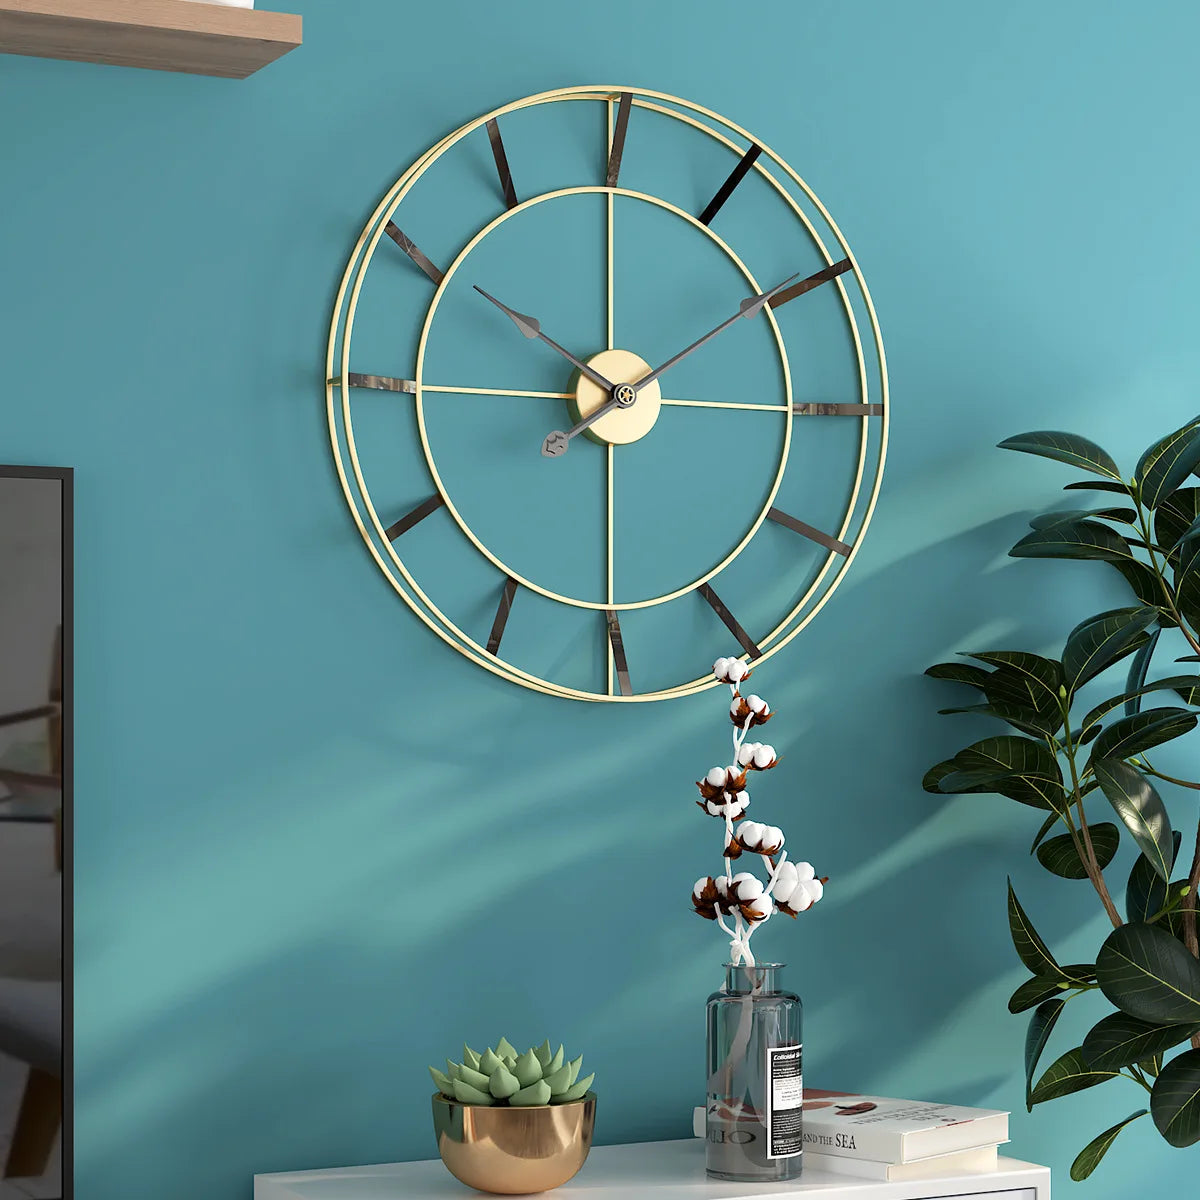 A large, modern gold geometric design wall clock on a teal wall above a decorative shelf with plants and books.